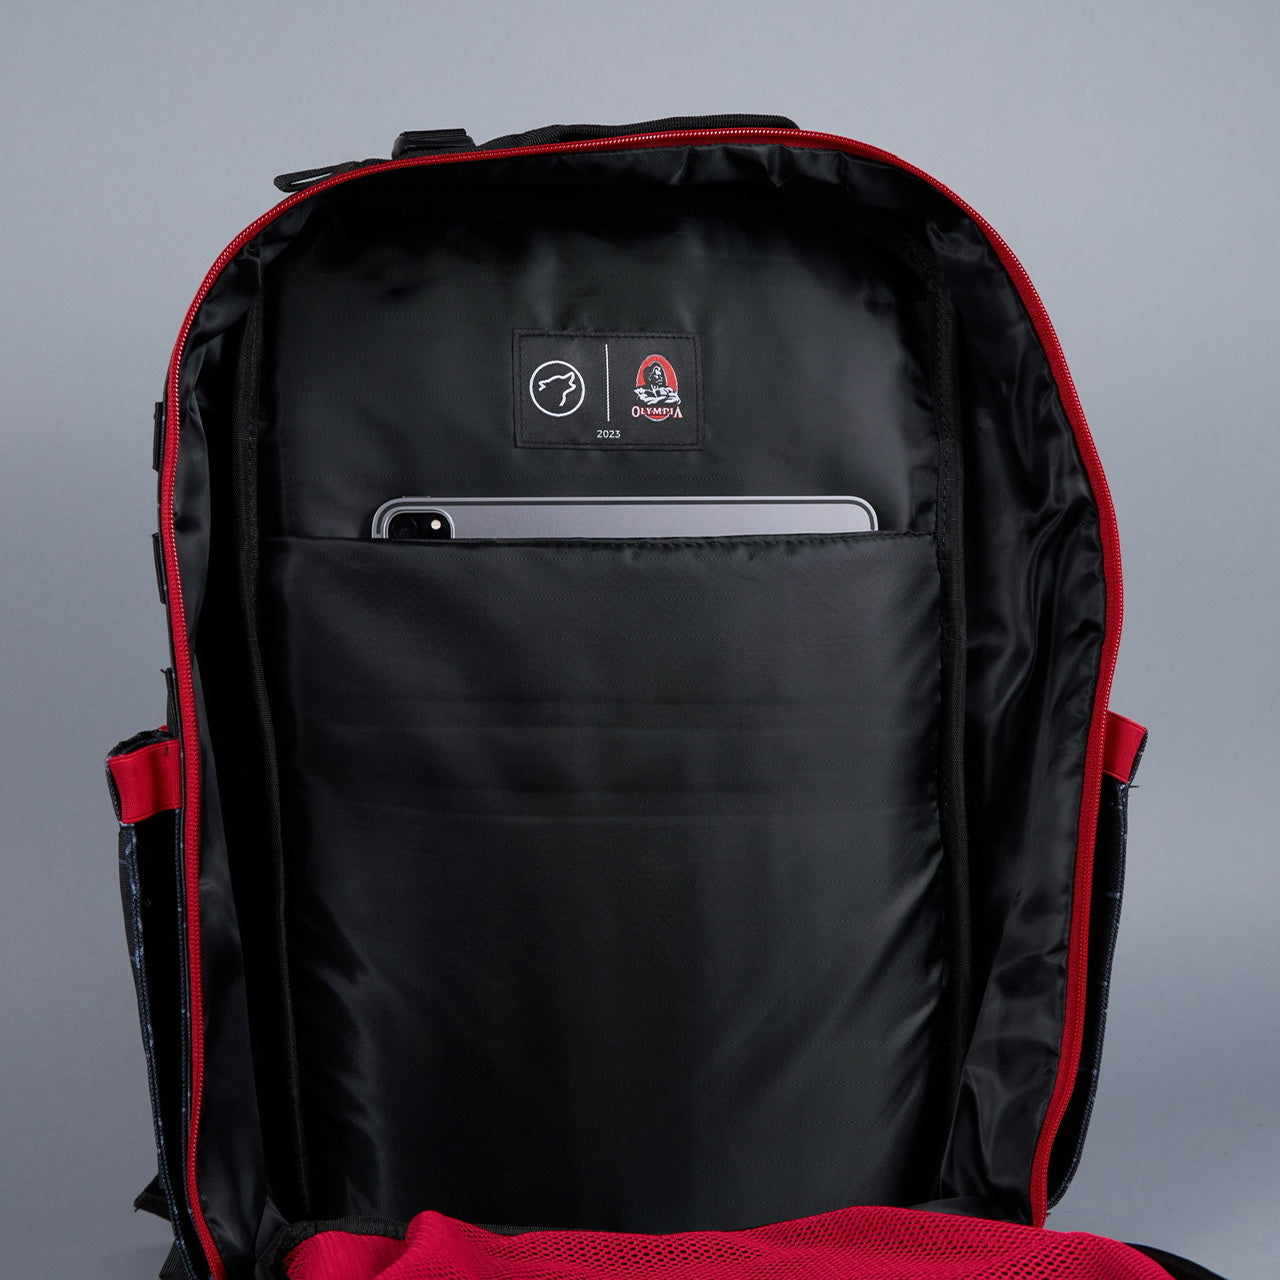 45L 2023 IFBB Olympia Meal Prep Management Backpack